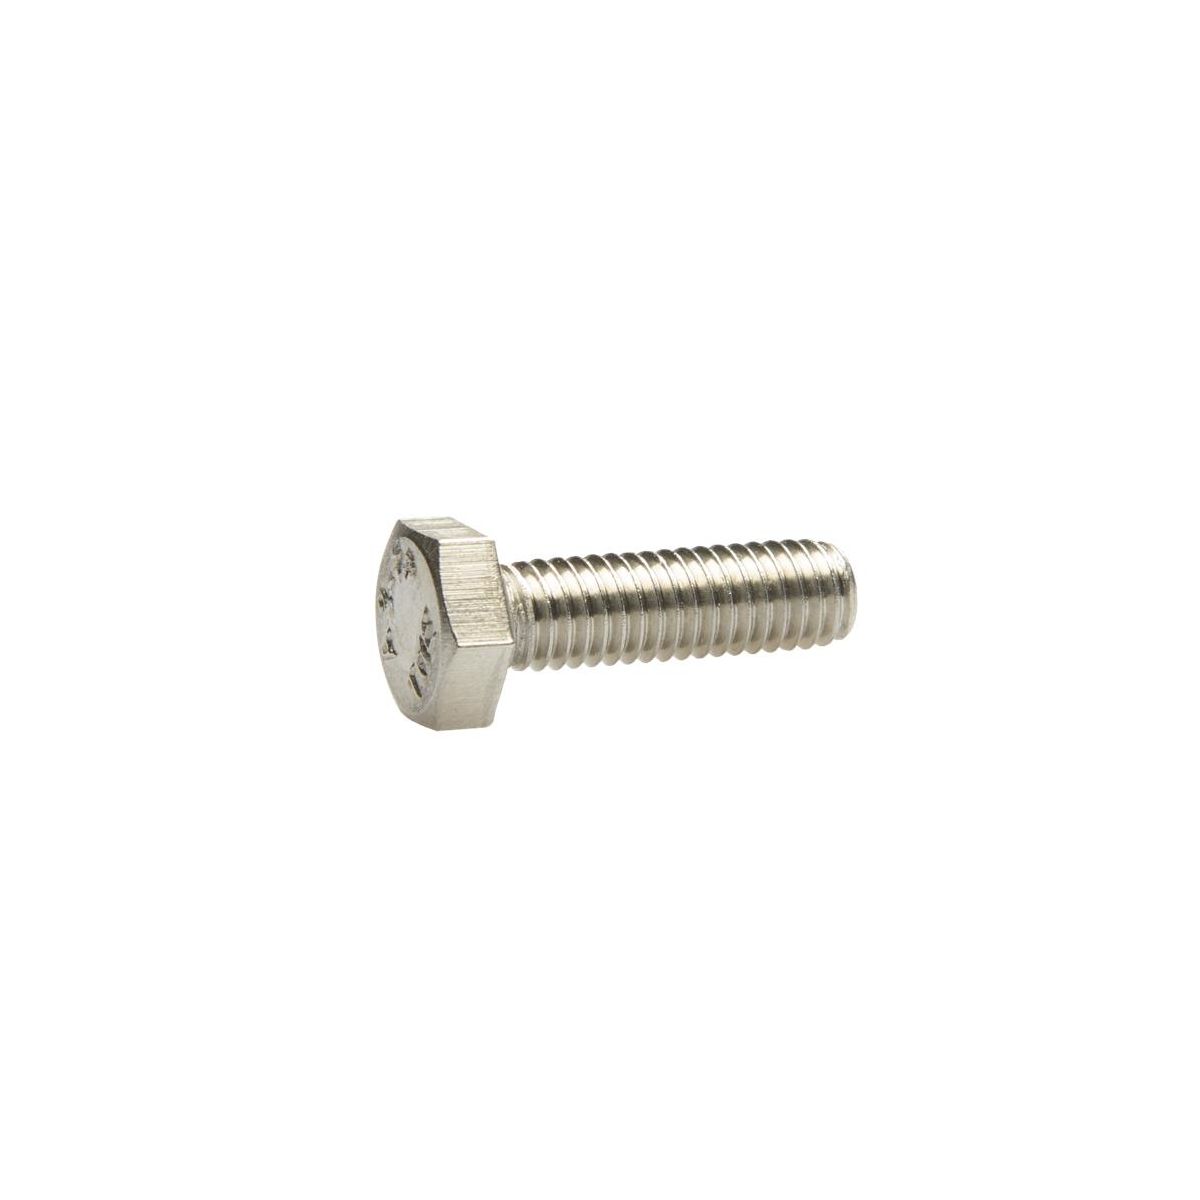 3000pcs 8g x 50mm Stainless Steel SS304 Decking Screw Kit With Clever Tool 